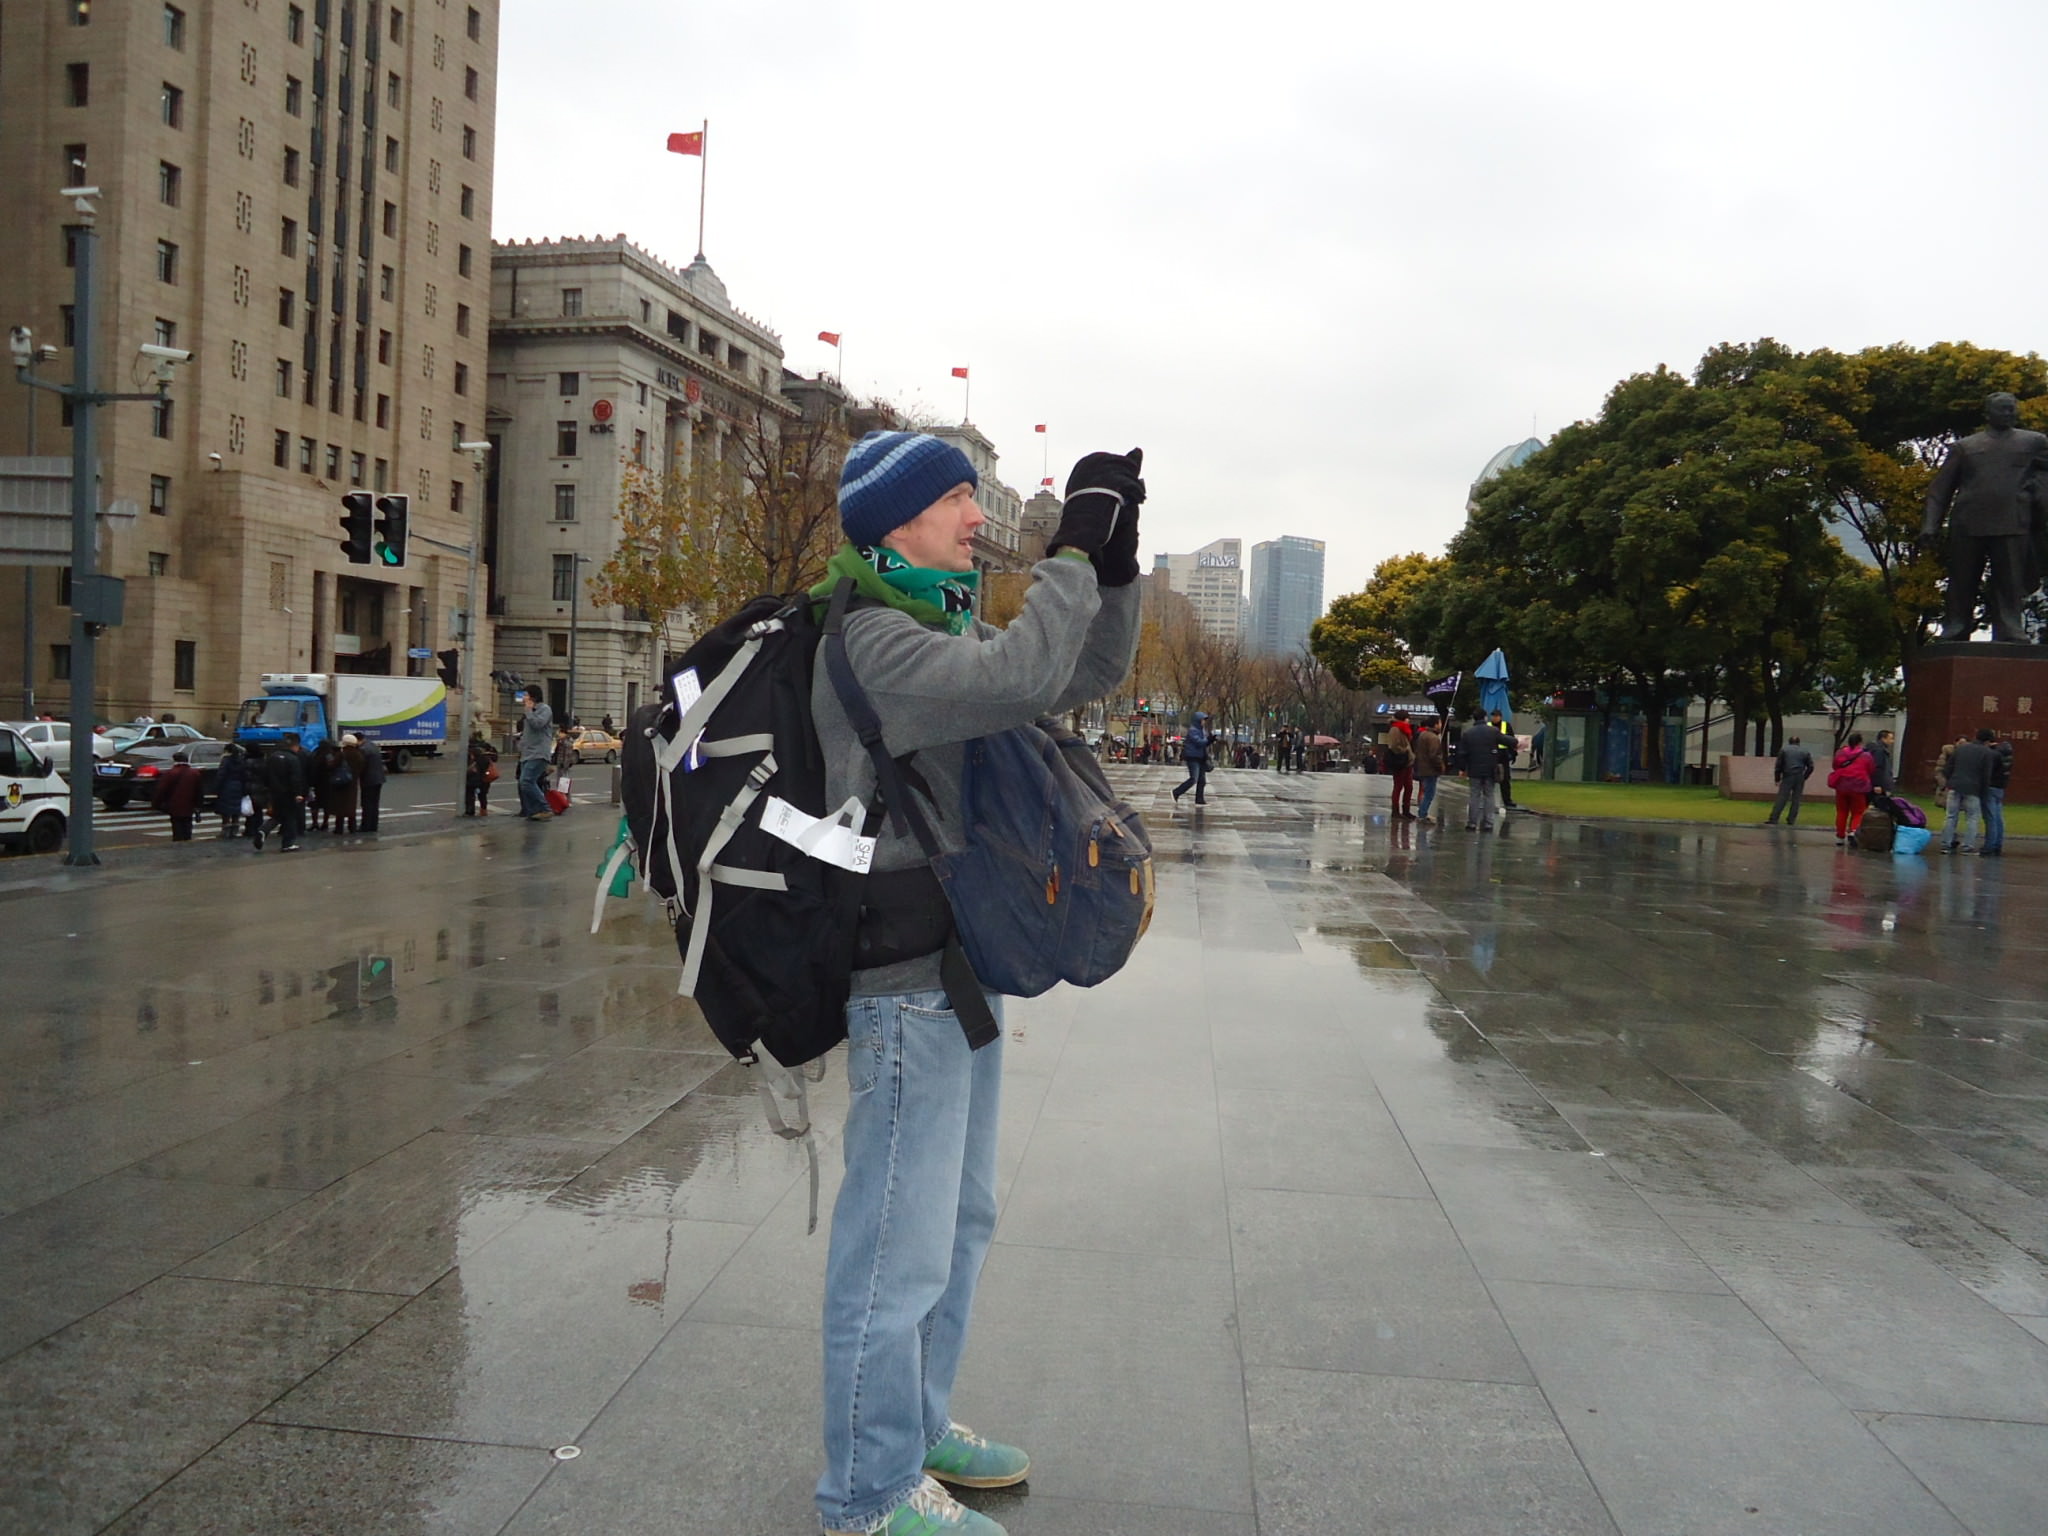 Jonny Blair taking a photo in Shanghai, CHINA. He lives a lifestyle of travel.